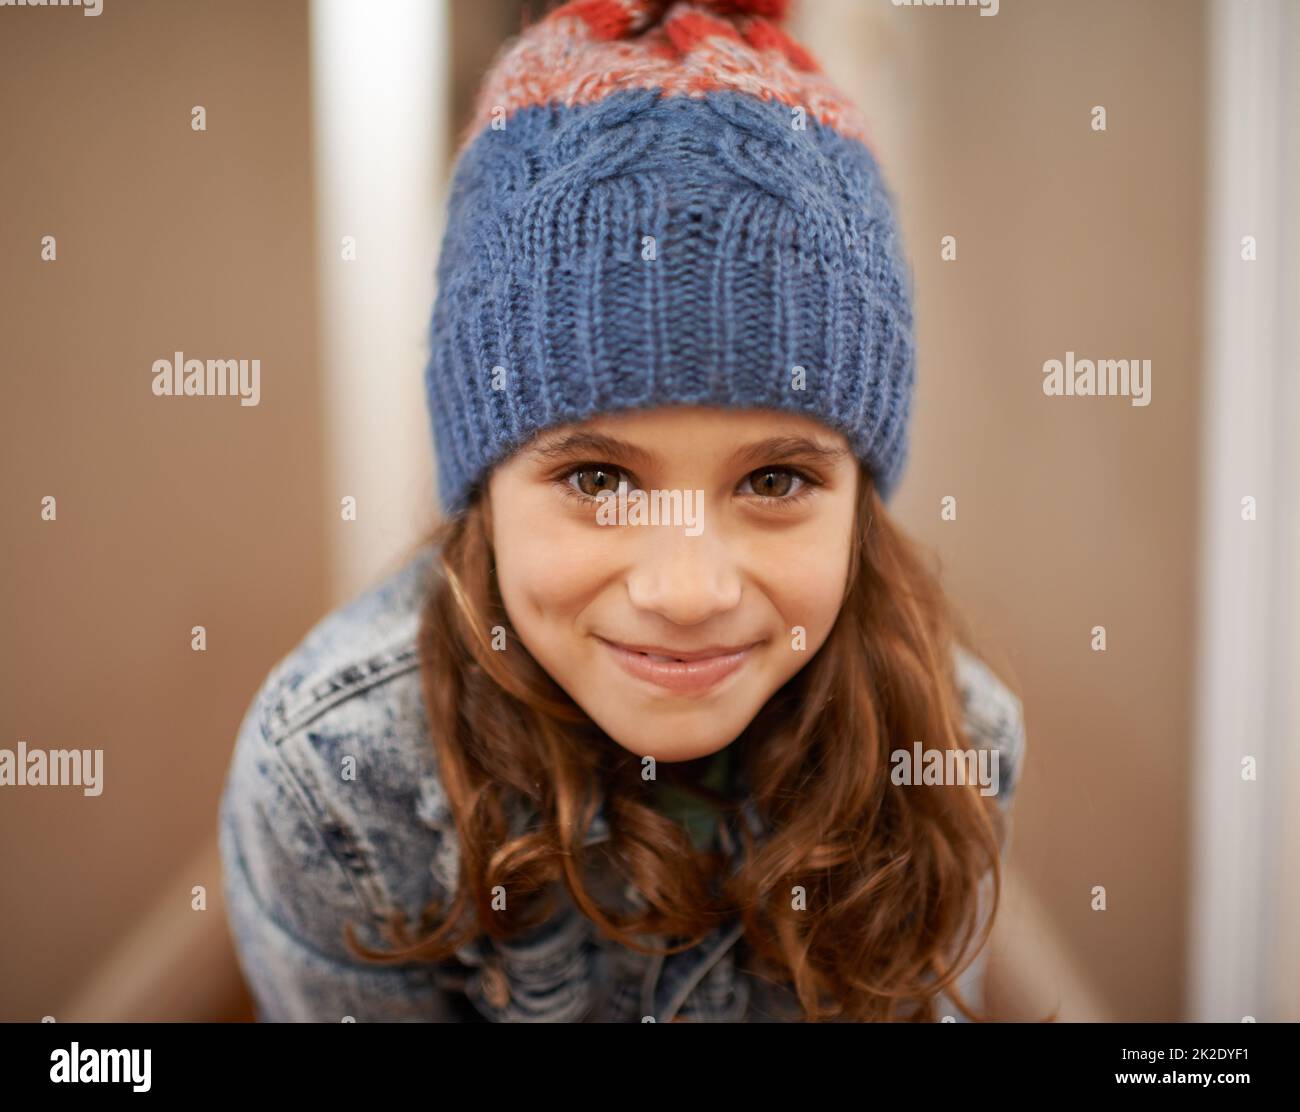 Time for some vacation fun. Shot of a young girl posing in her woolen hat indoors. Stock Photo